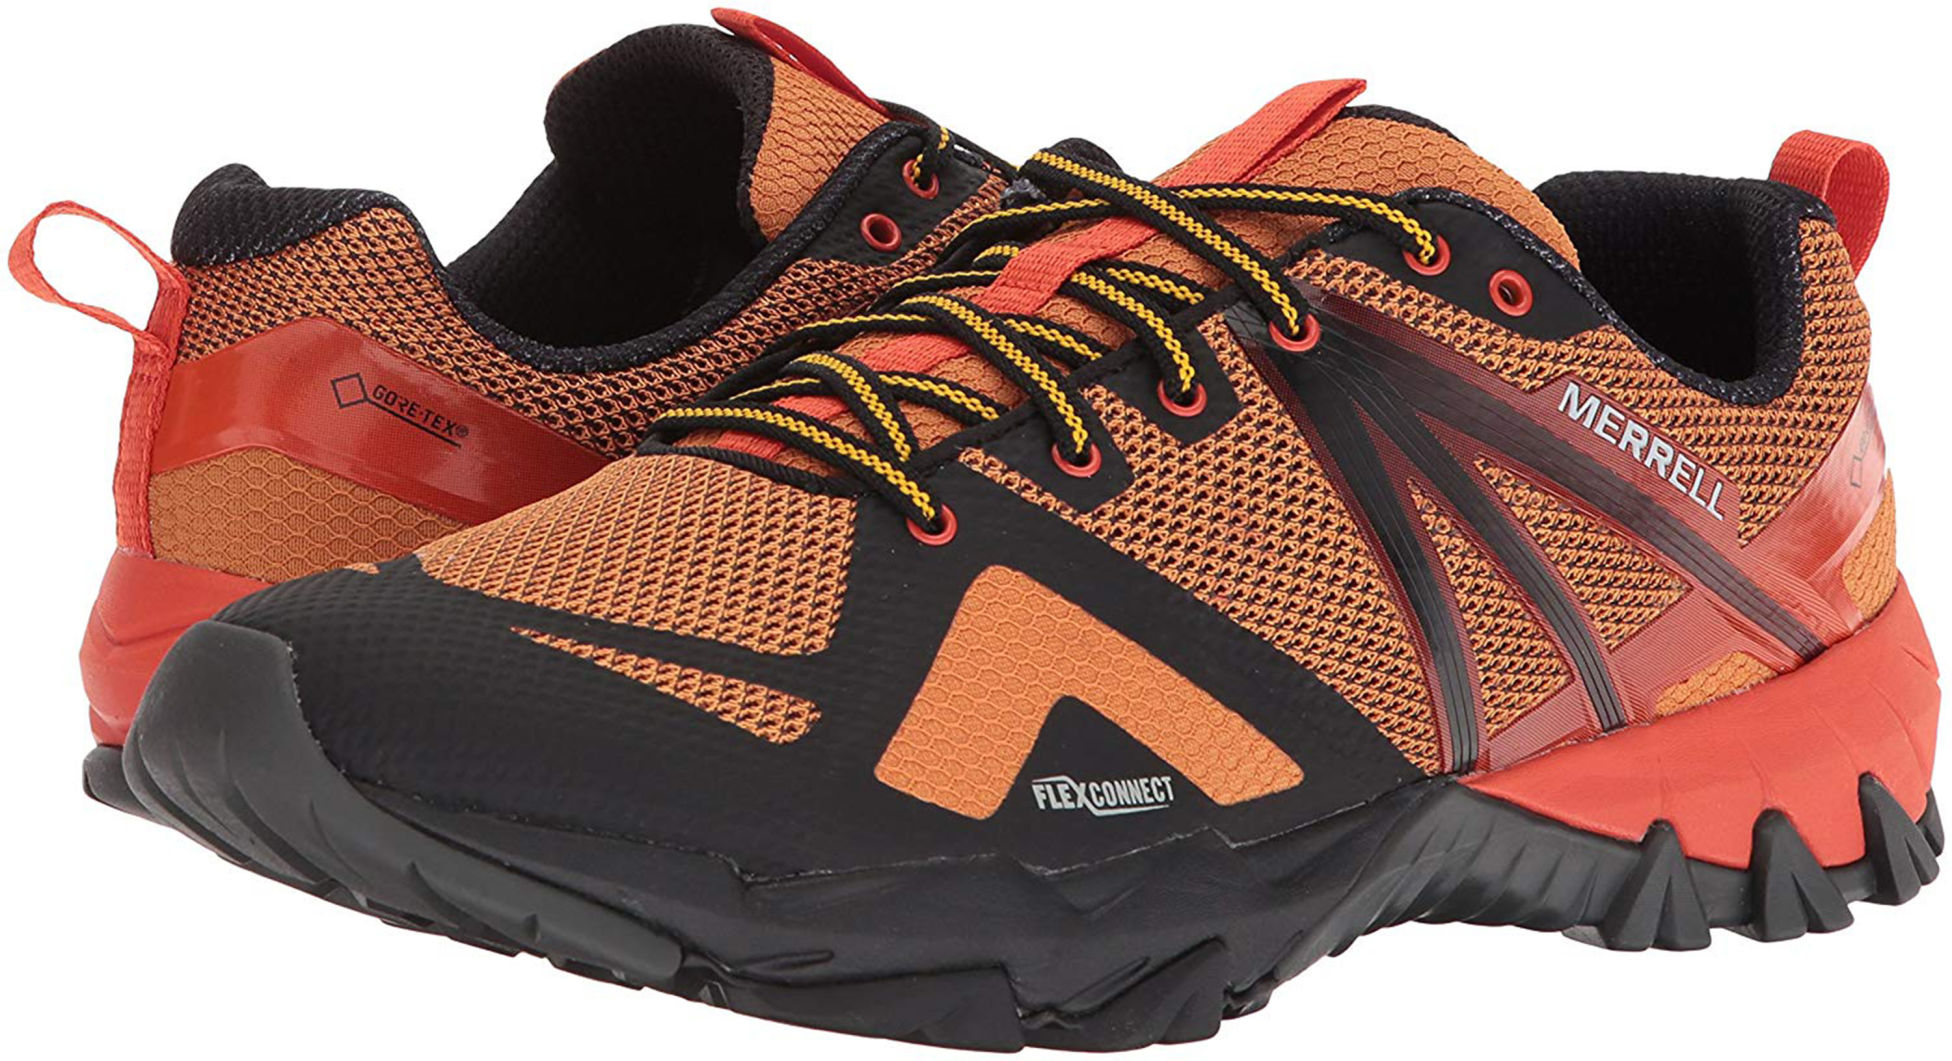 Merrell's MQM shoes combine hiking boot 